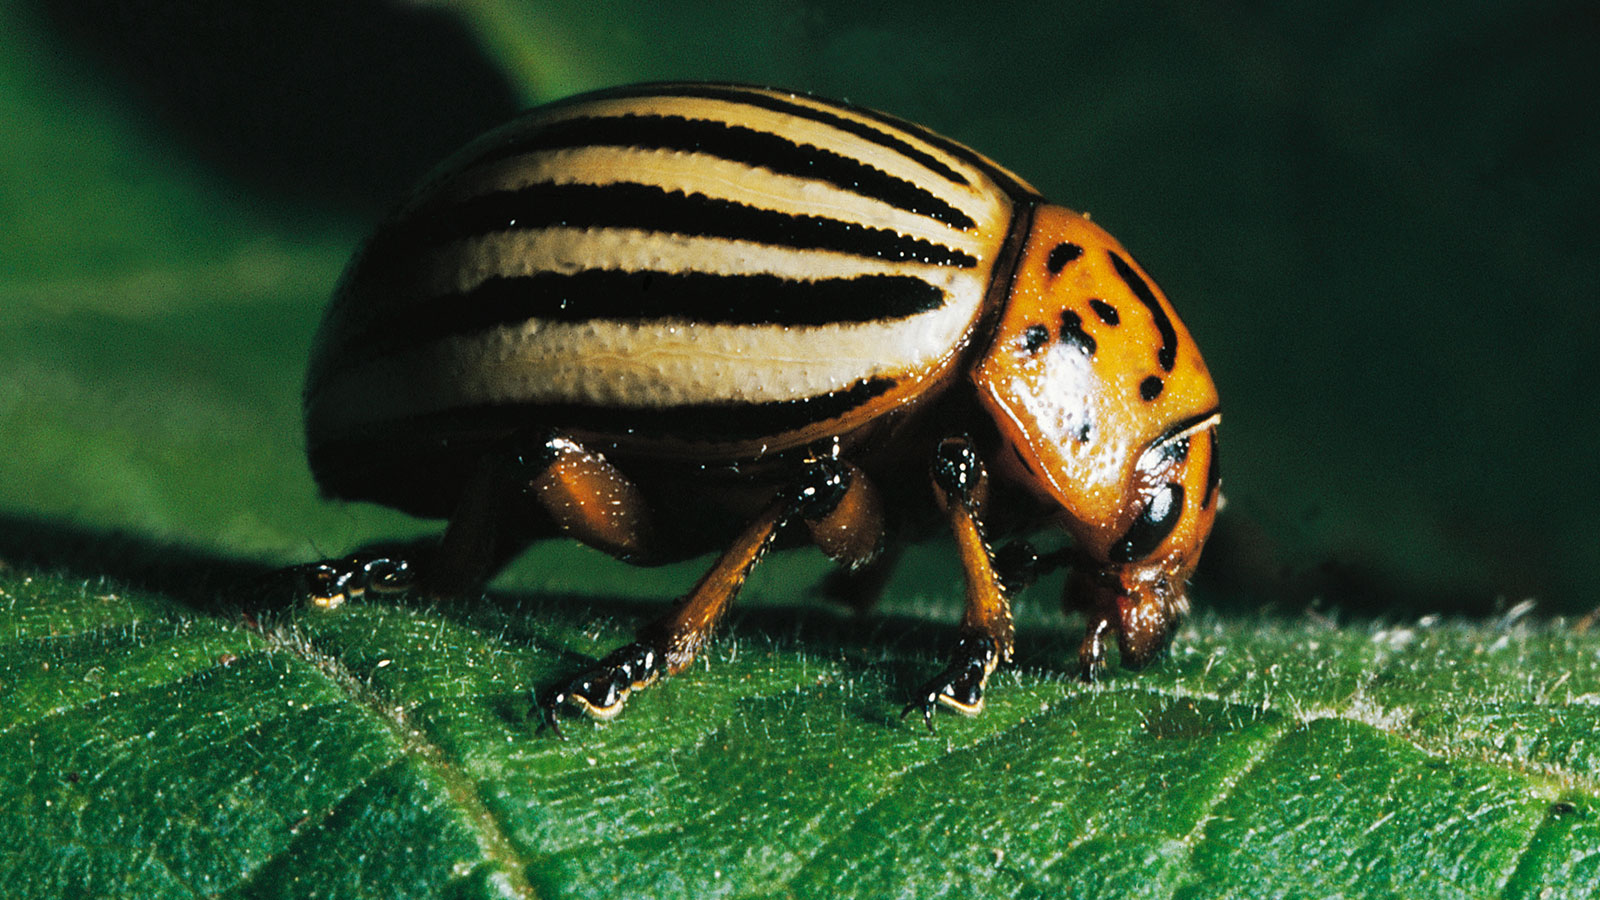 Potato Beetle – The Amazing World of Insects